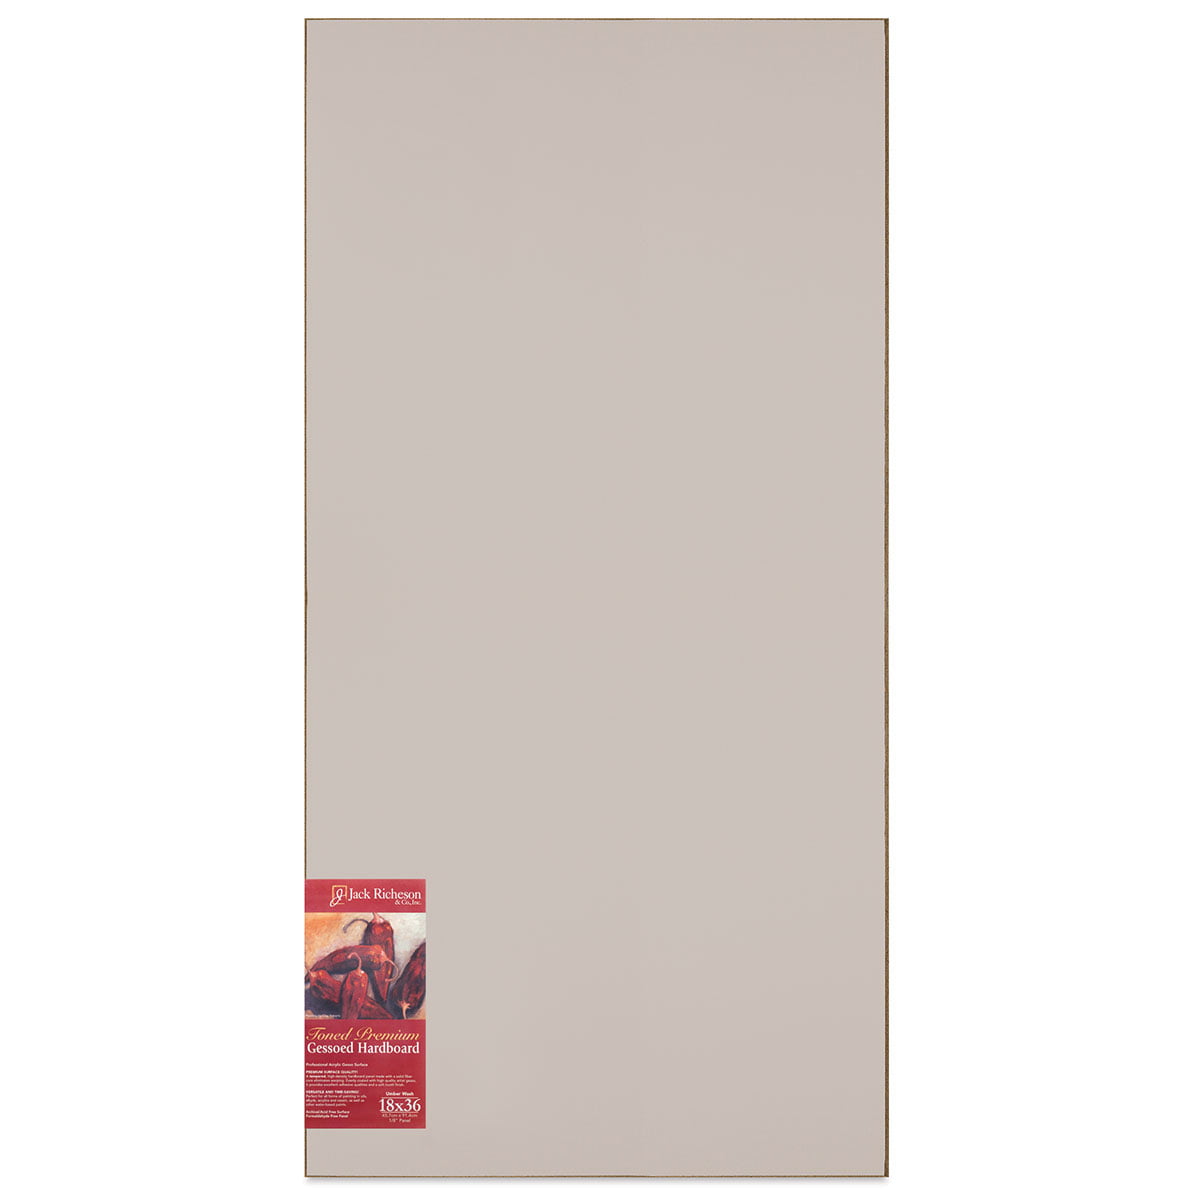  PHOENIX Gesso Boards for Painting - 8x10 Inch / 6 Pack